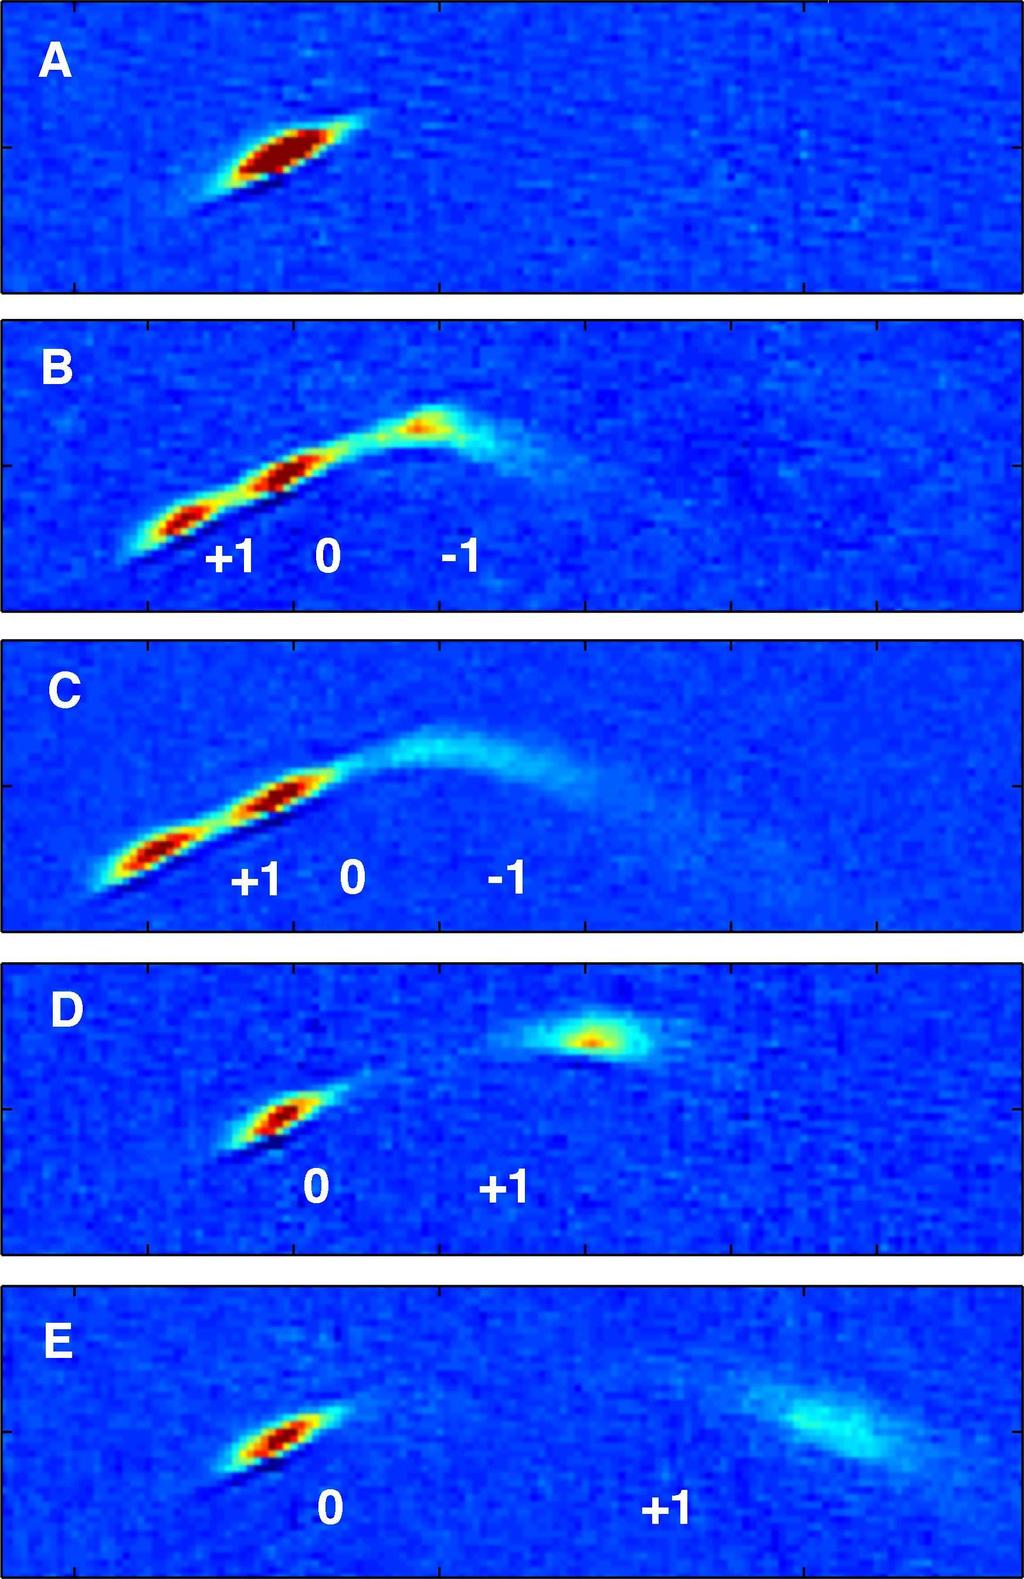 Fig. 3. A typical outcoupling run of the spinor dynamics-driven dual beam atom laser. a) 0 ms: the full condensate, in situ. b)+ 20 ms: immediately after outcoupling.